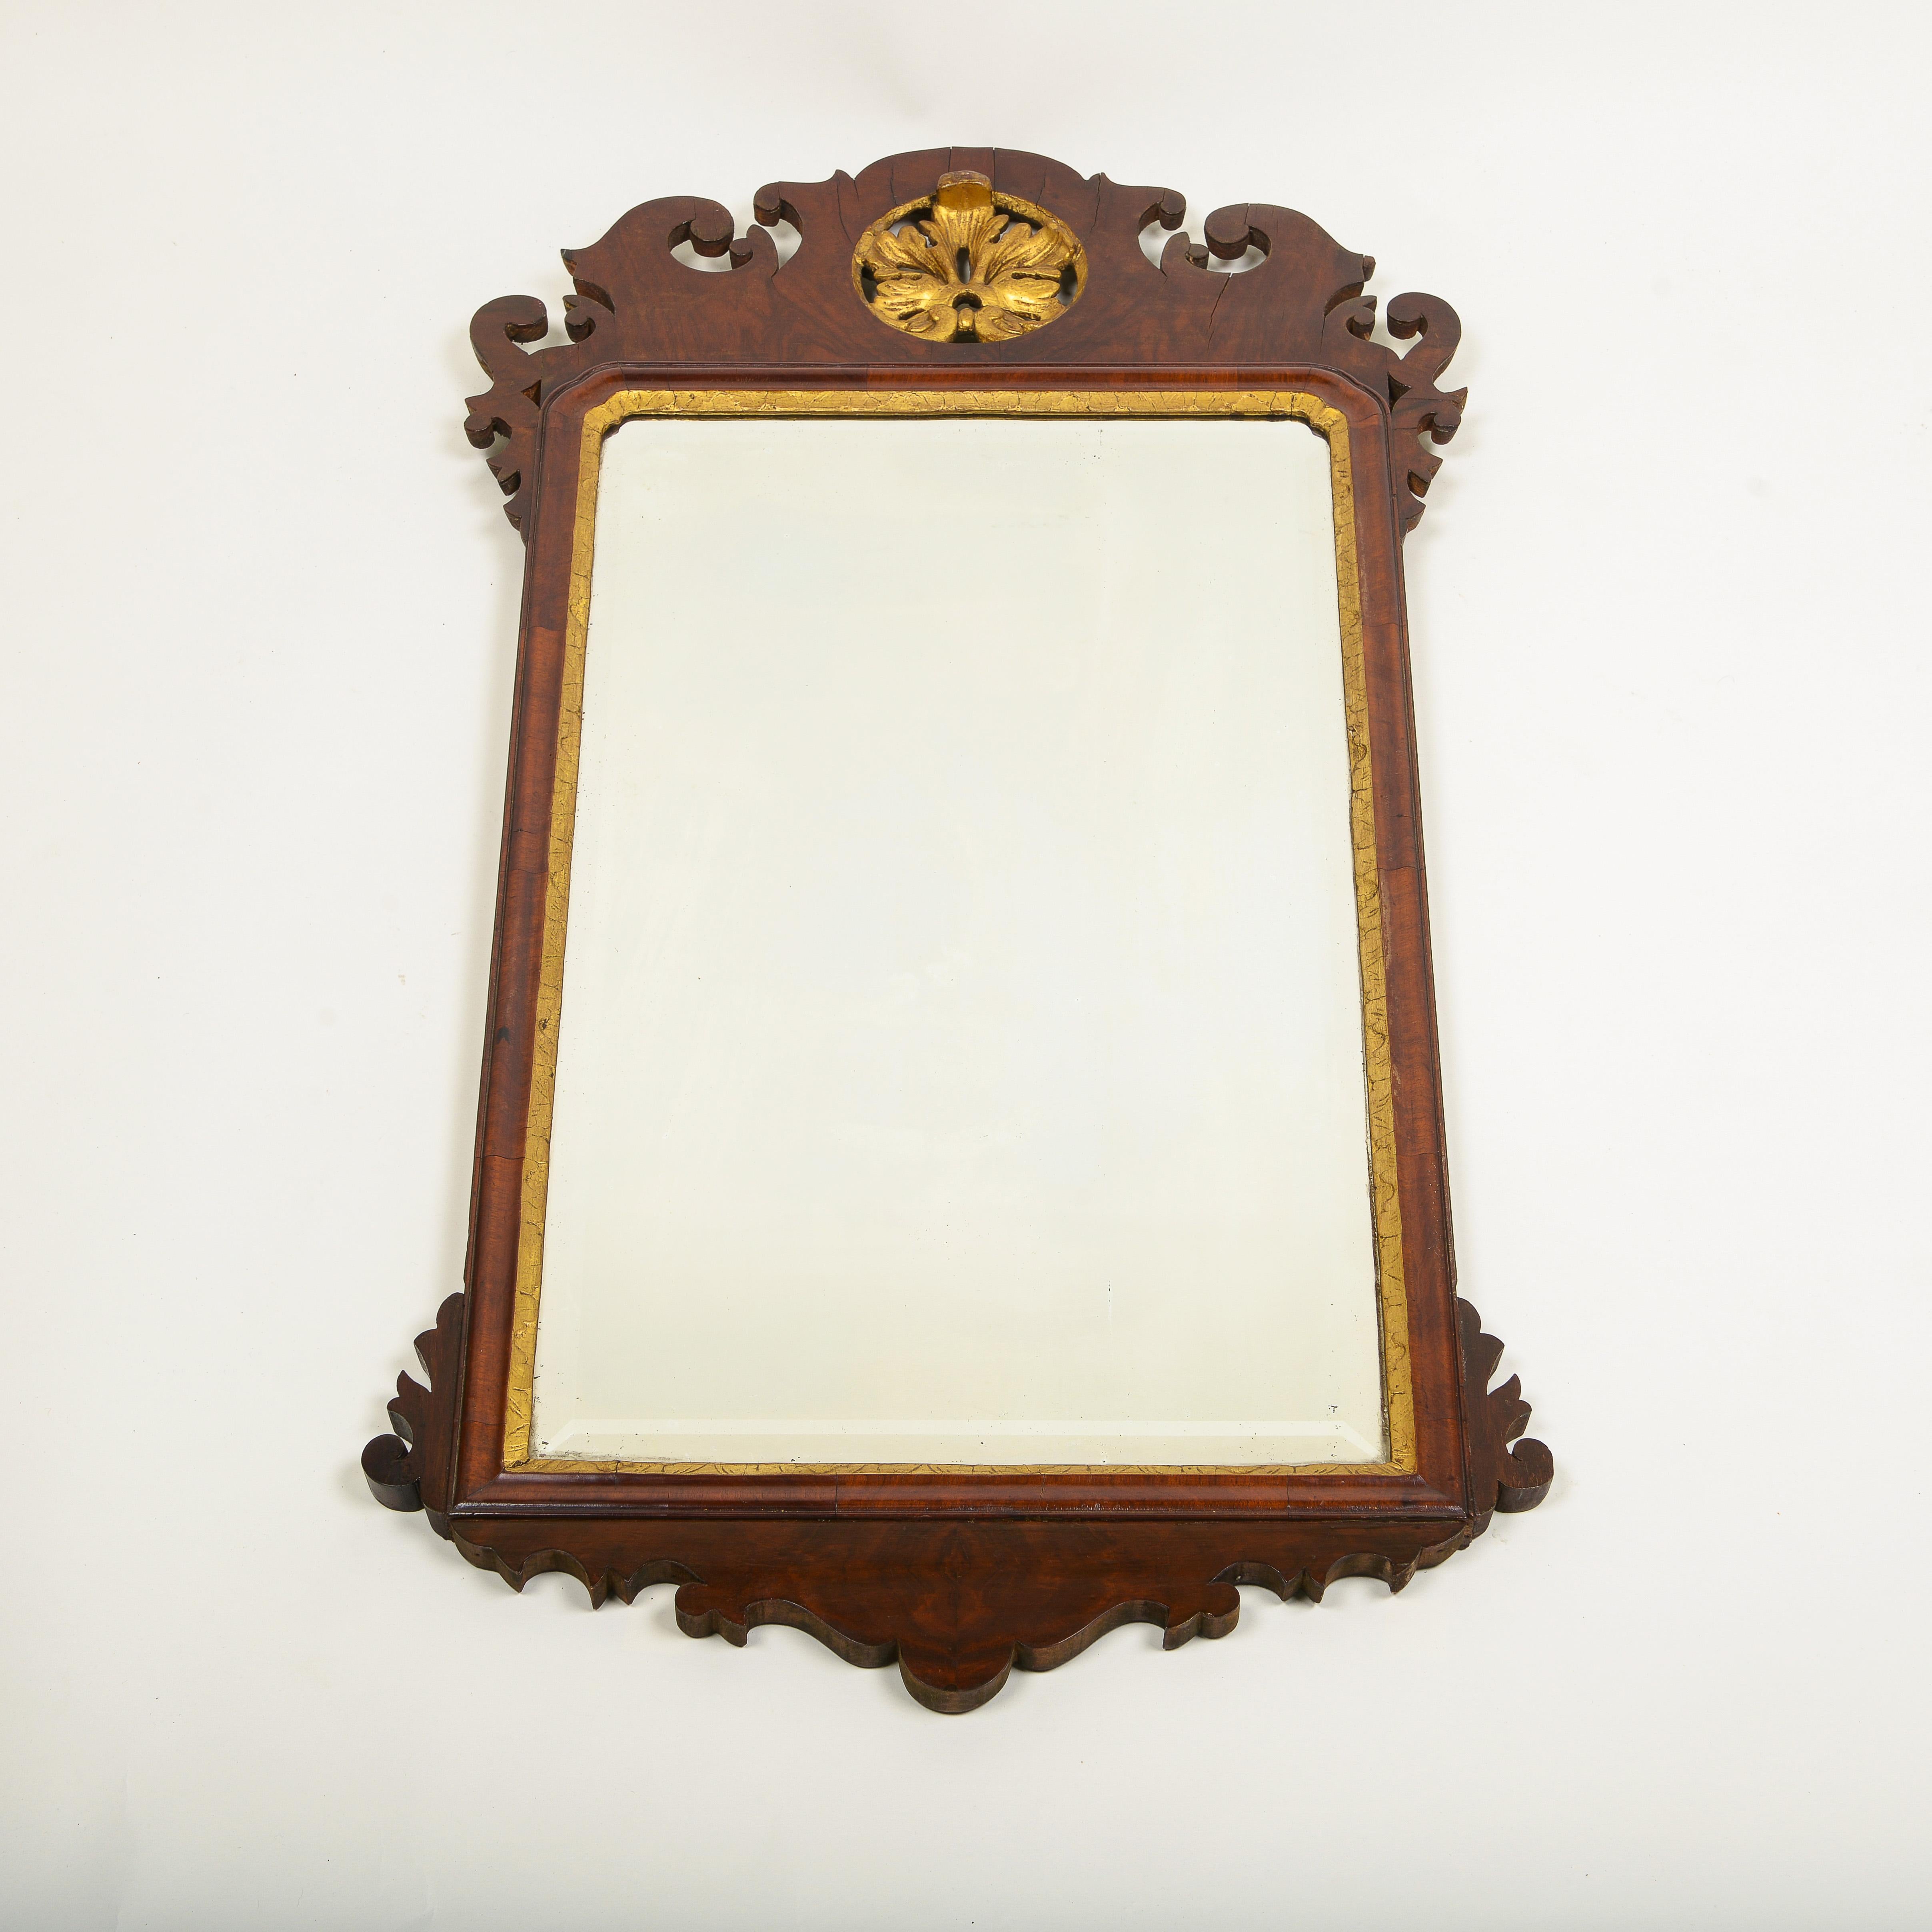 The rectangular beveled plate within a conforming surround with arched scrolling cresting, centered by a gilt foliate clasp, and apron.